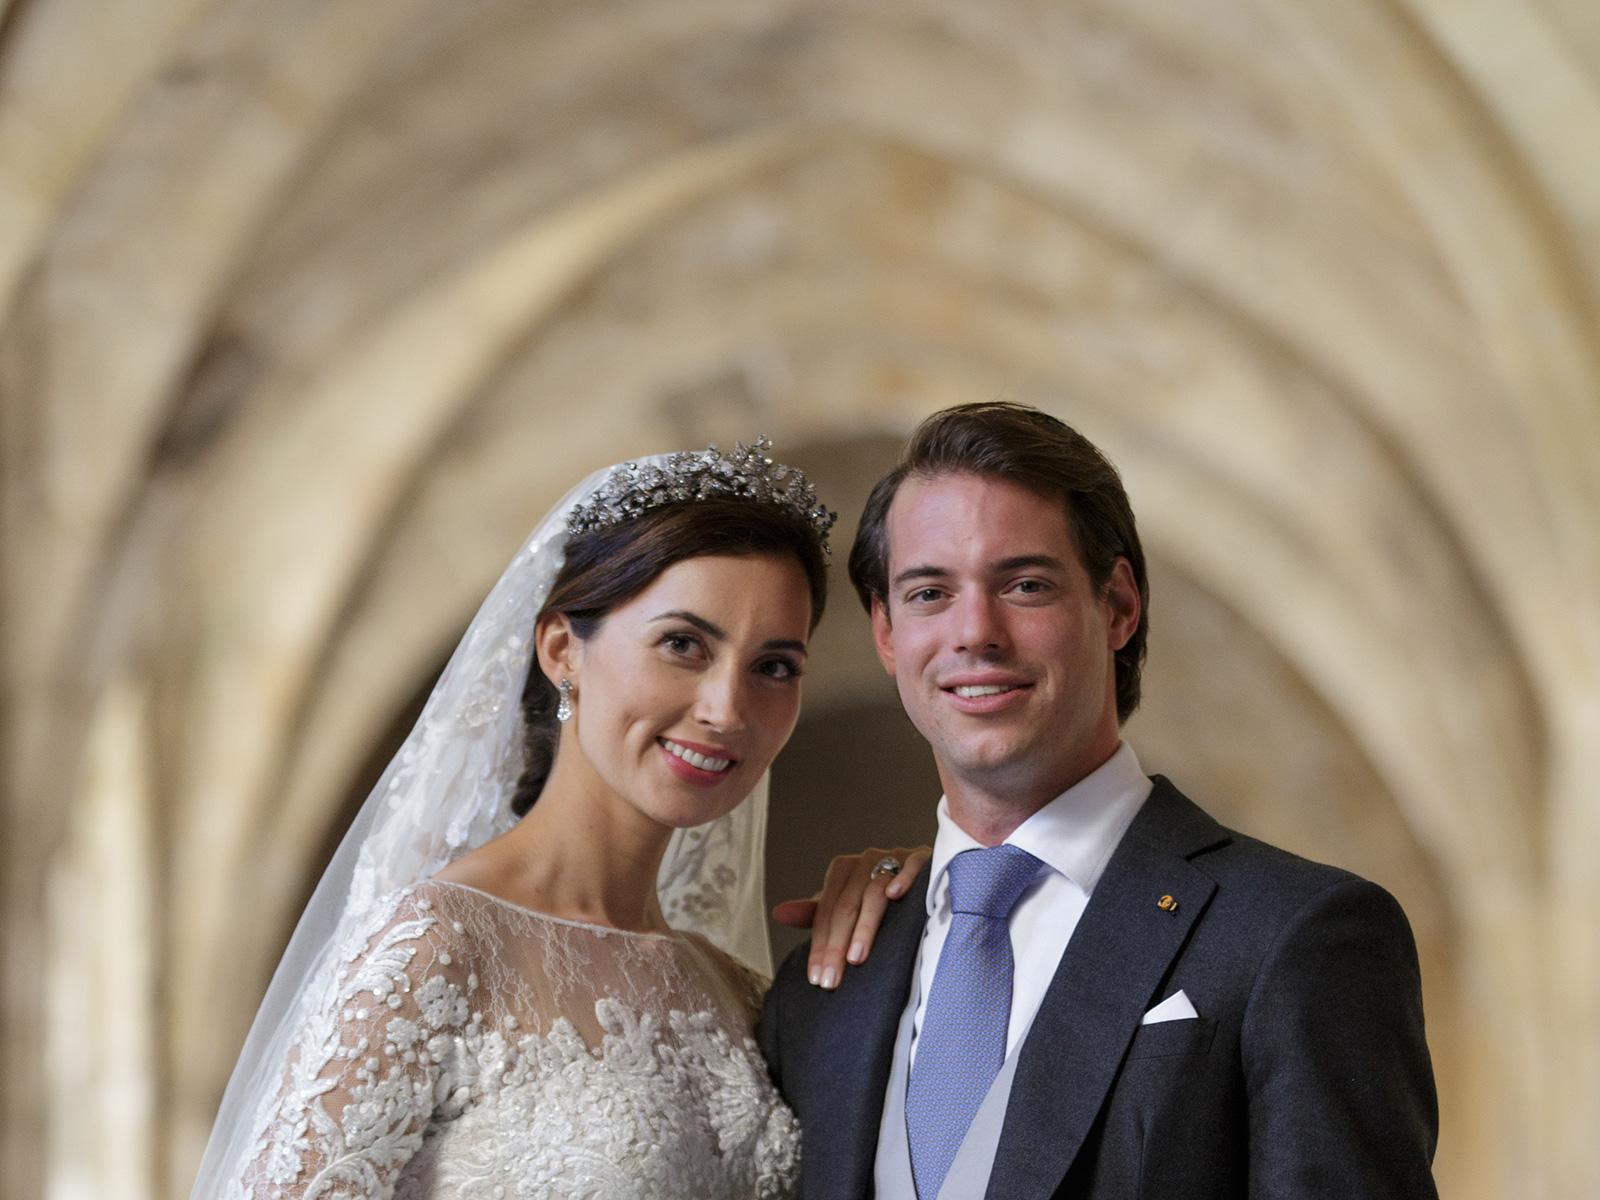 Prince Félix and Princess Claire at their religious wedding in 2013